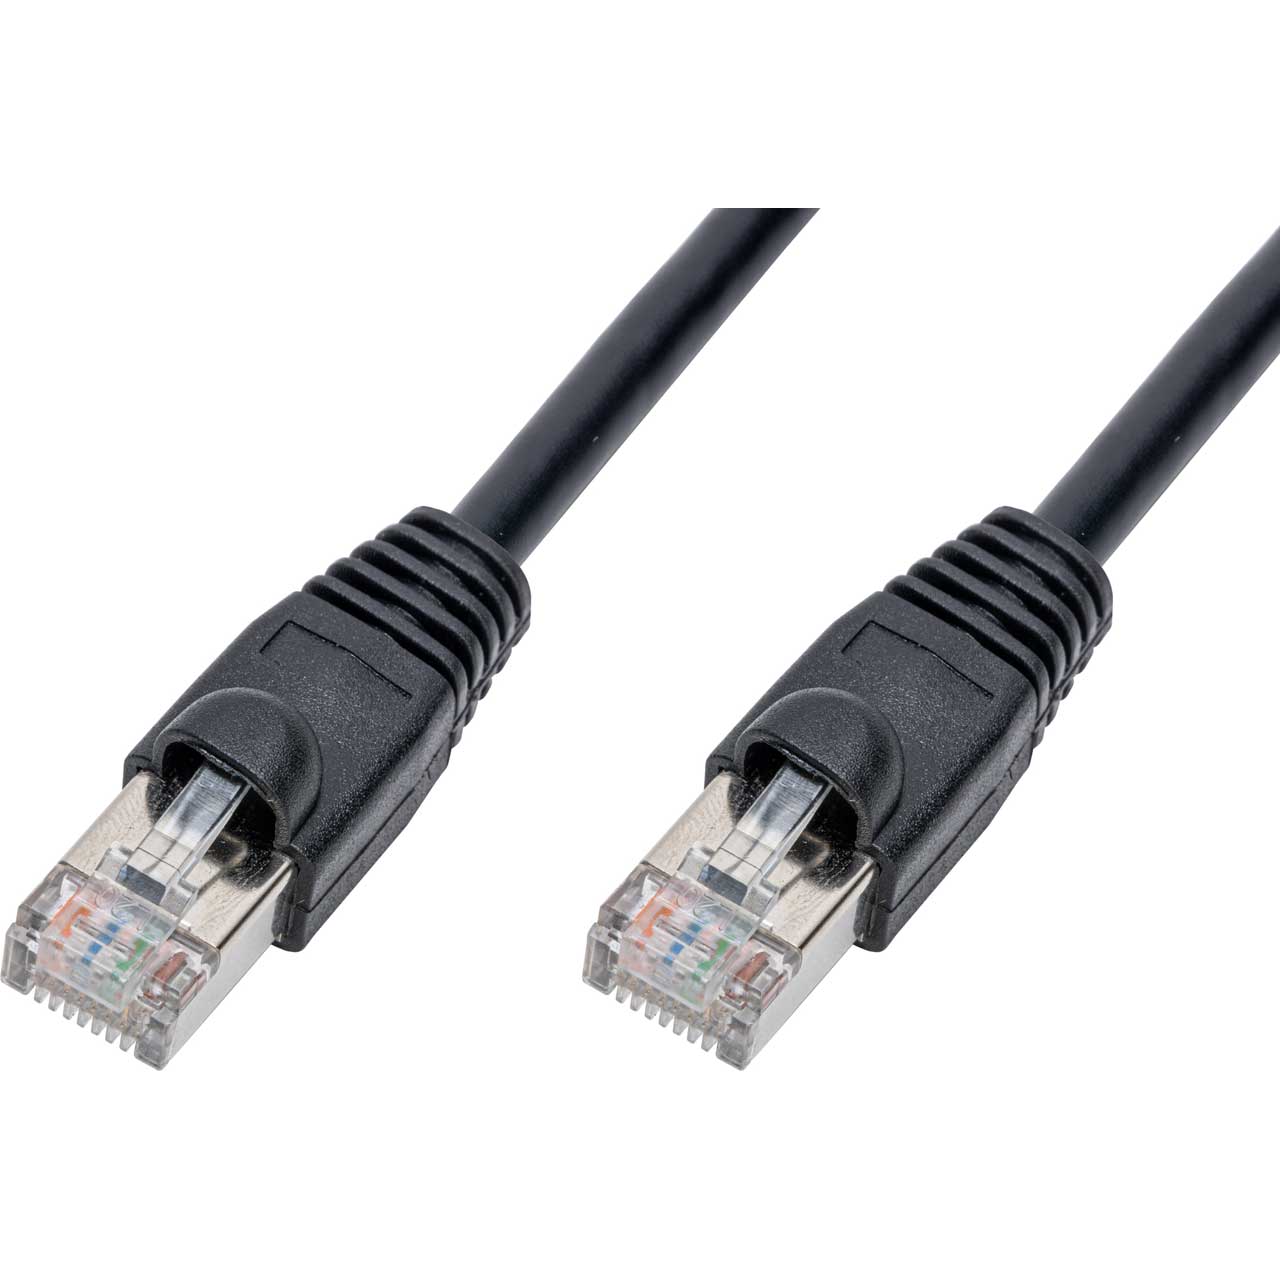 Laird TUFFCAT-S-200 Canare Shielded CAT5e Cable with Shielded RJ45 Connectors - 200 Foot TUFFCAT-S-200